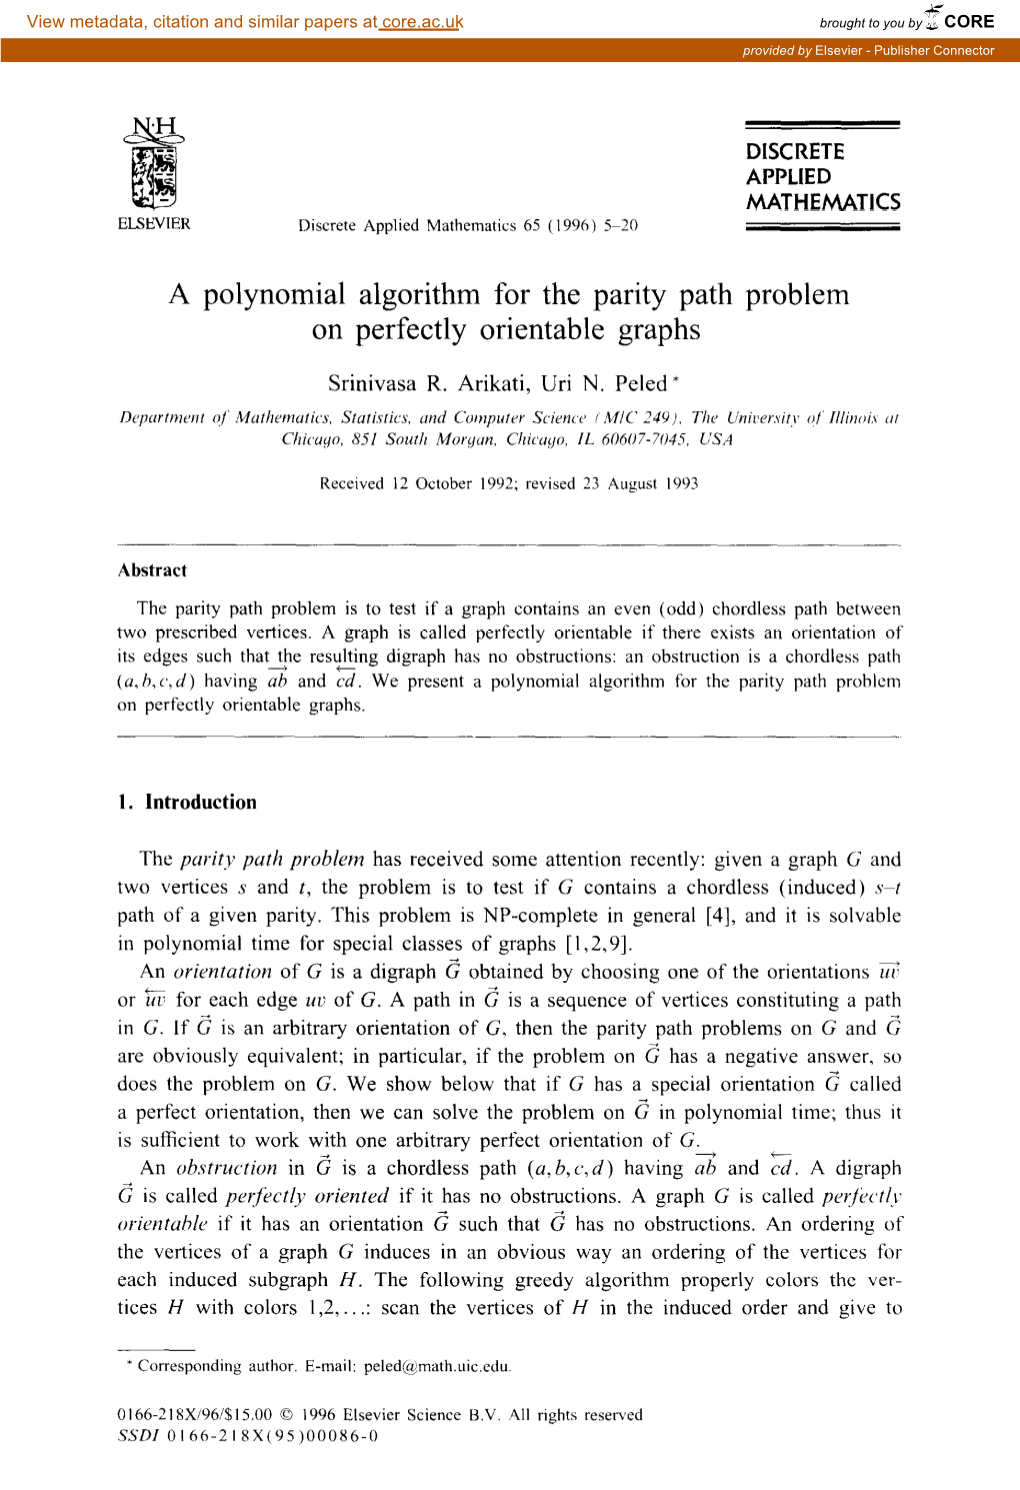 A Polynomial Algorithm for the Parity Path Problem on Perfectly Orientable Graphs